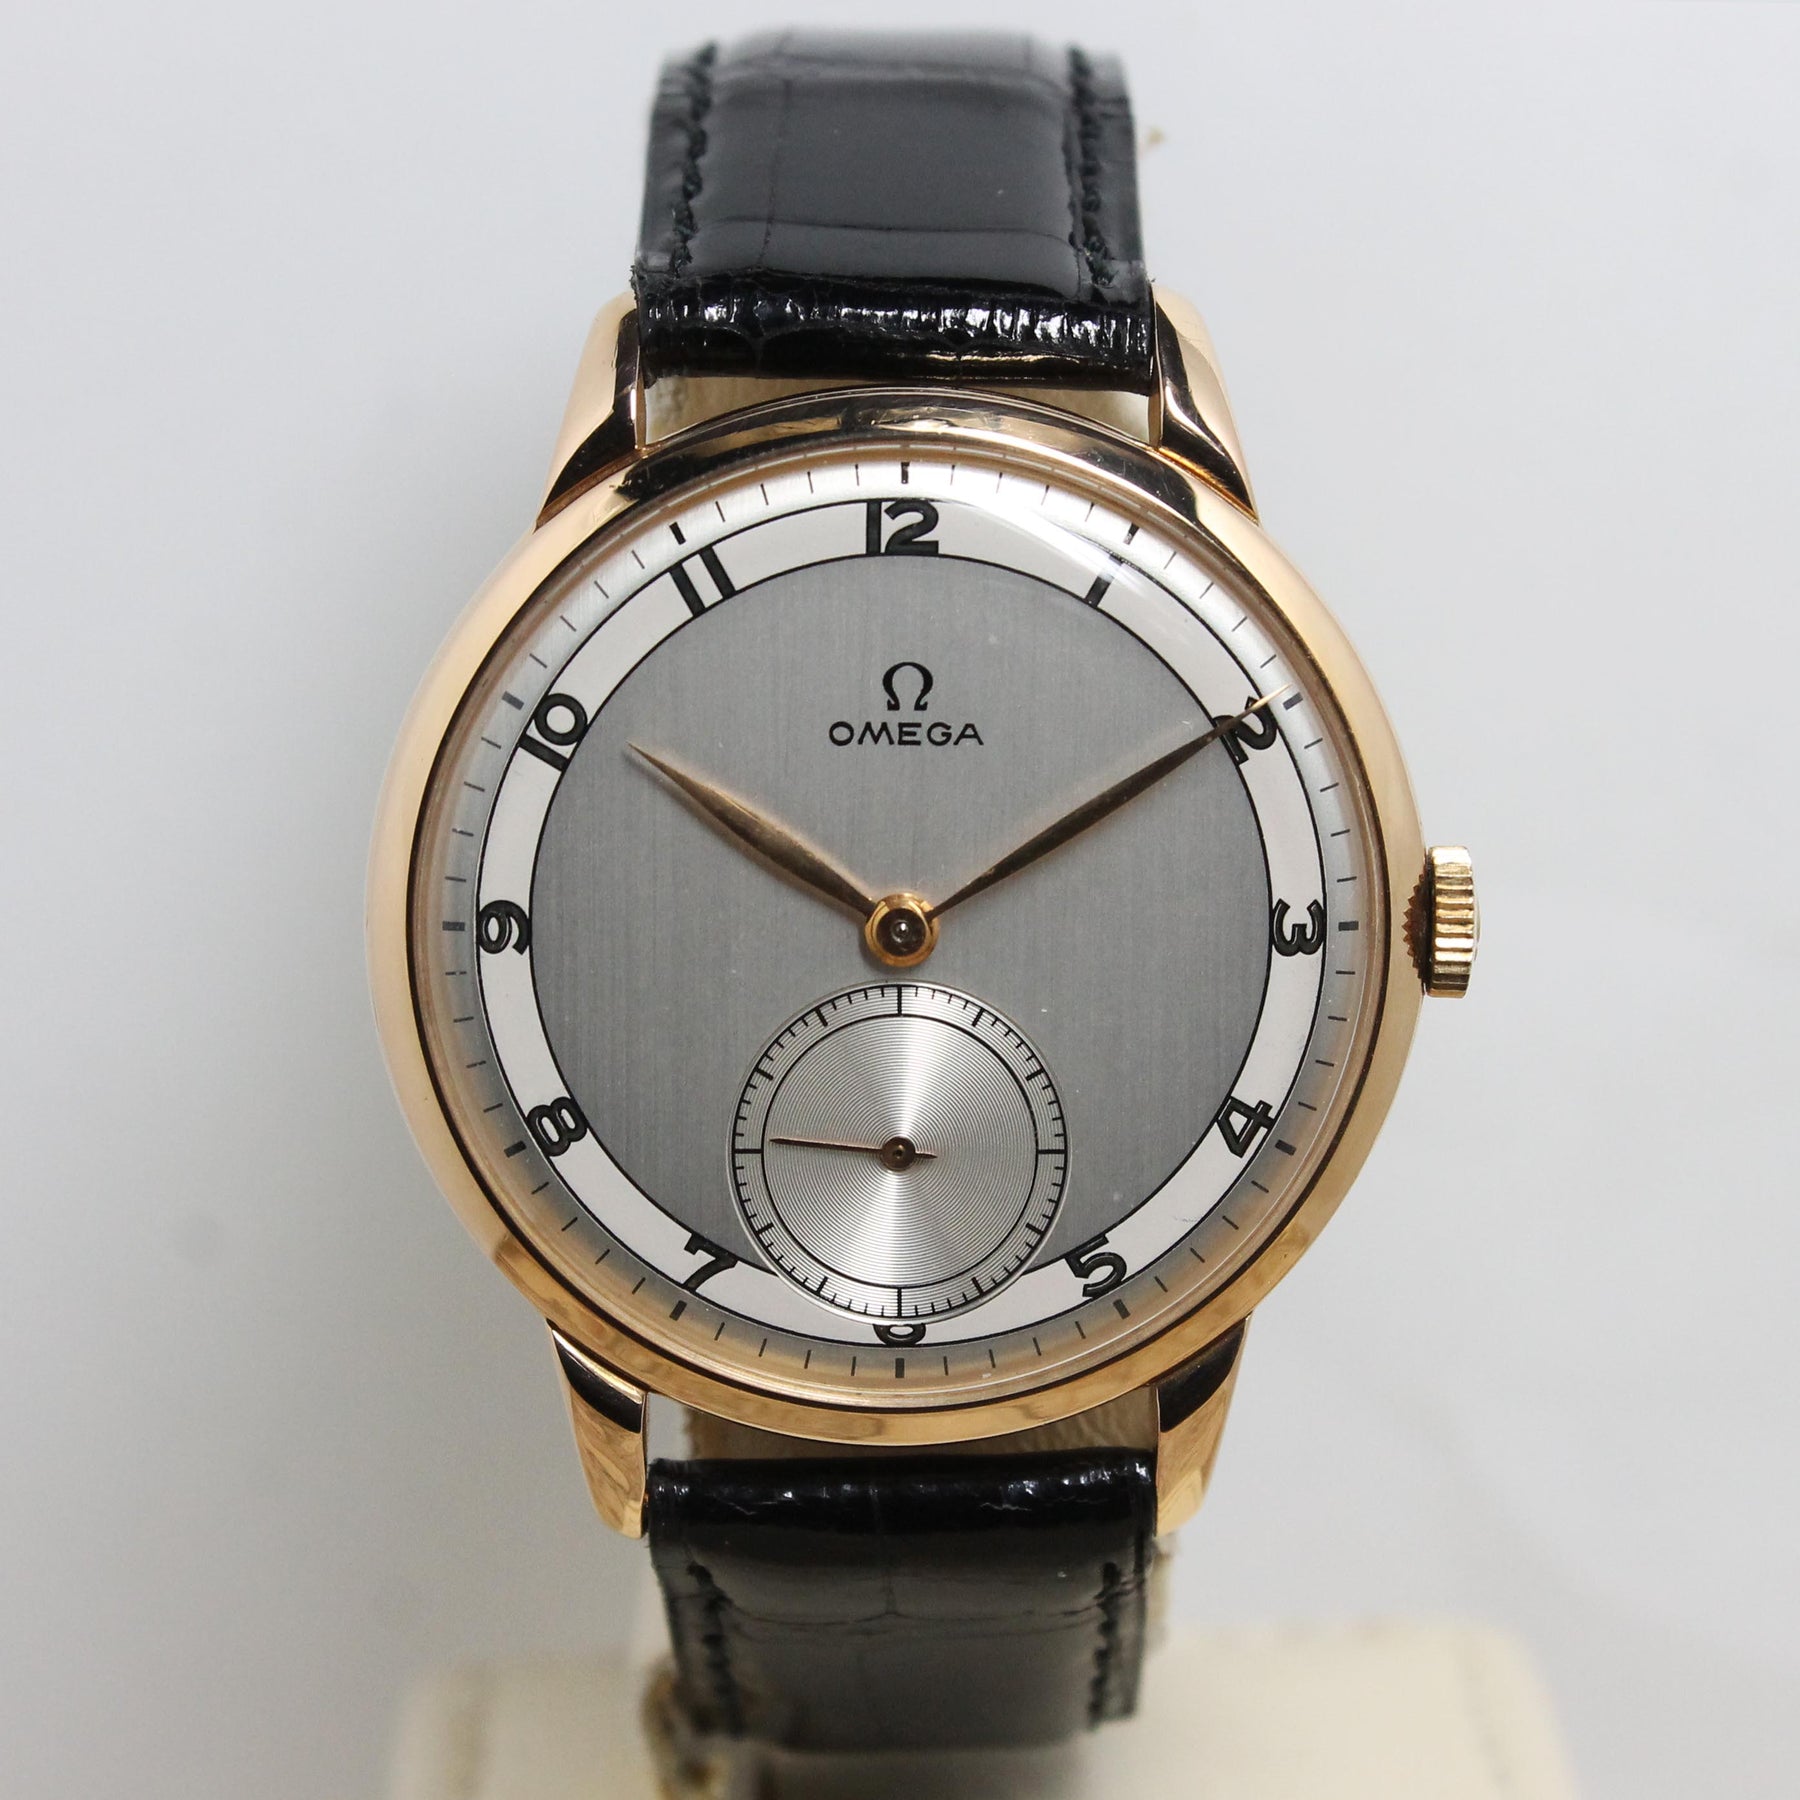 1952 Omega Dress Watch Pink Gold Two Tone Dial Ref. 2687